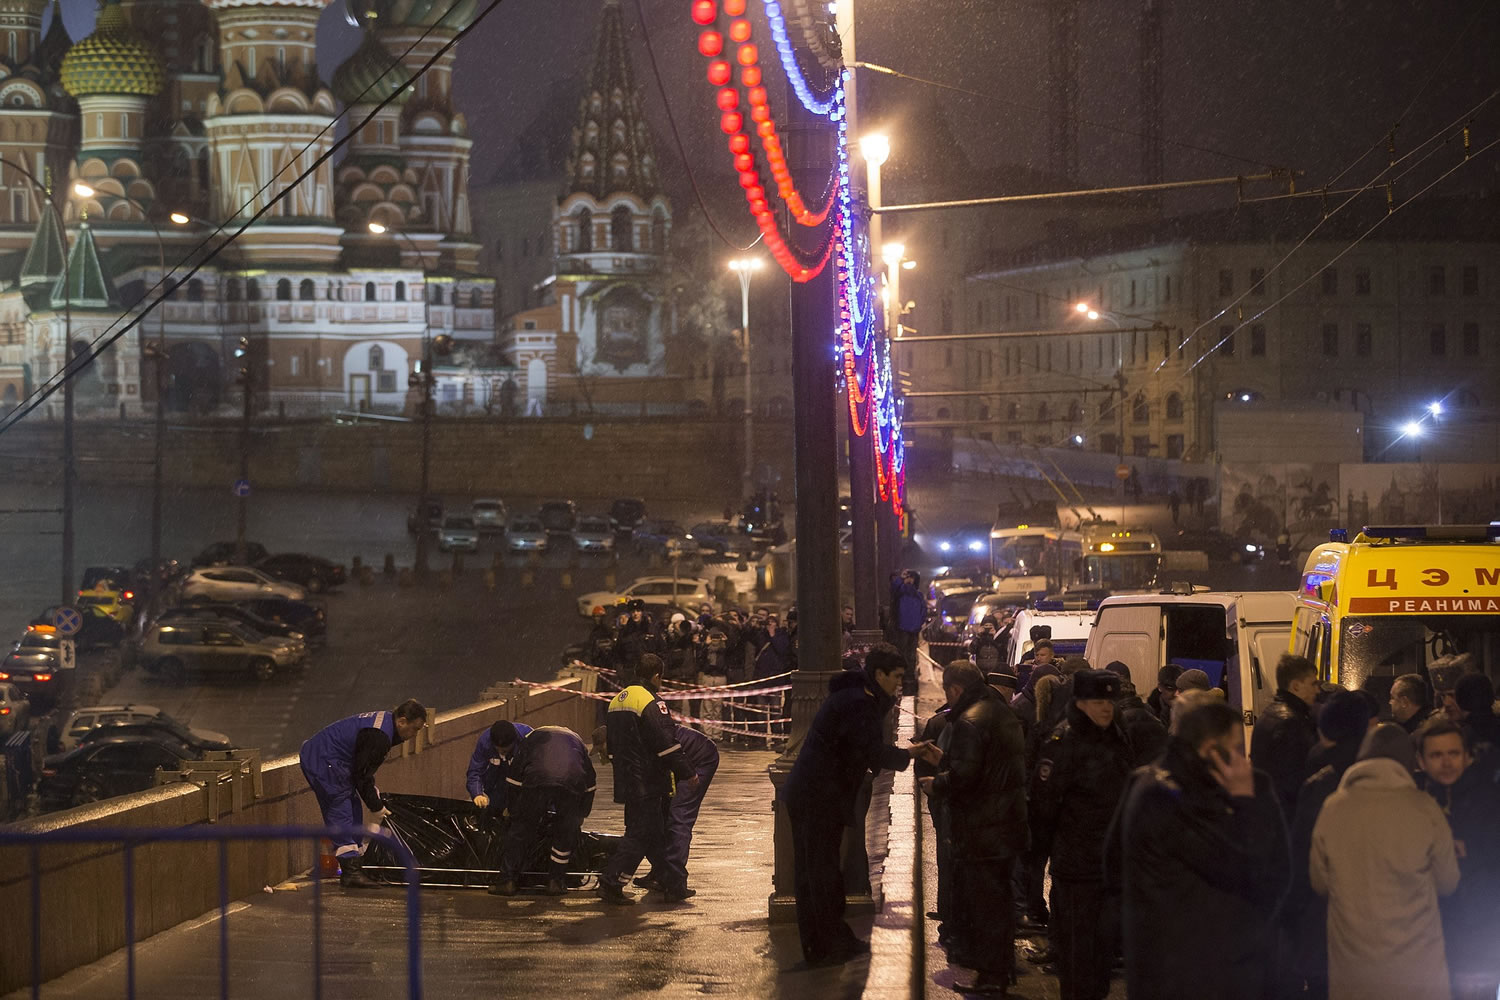 Medics put the the body of Boris Nemtsov on a stretcher early Saturday at Red Square in Moscow. St.